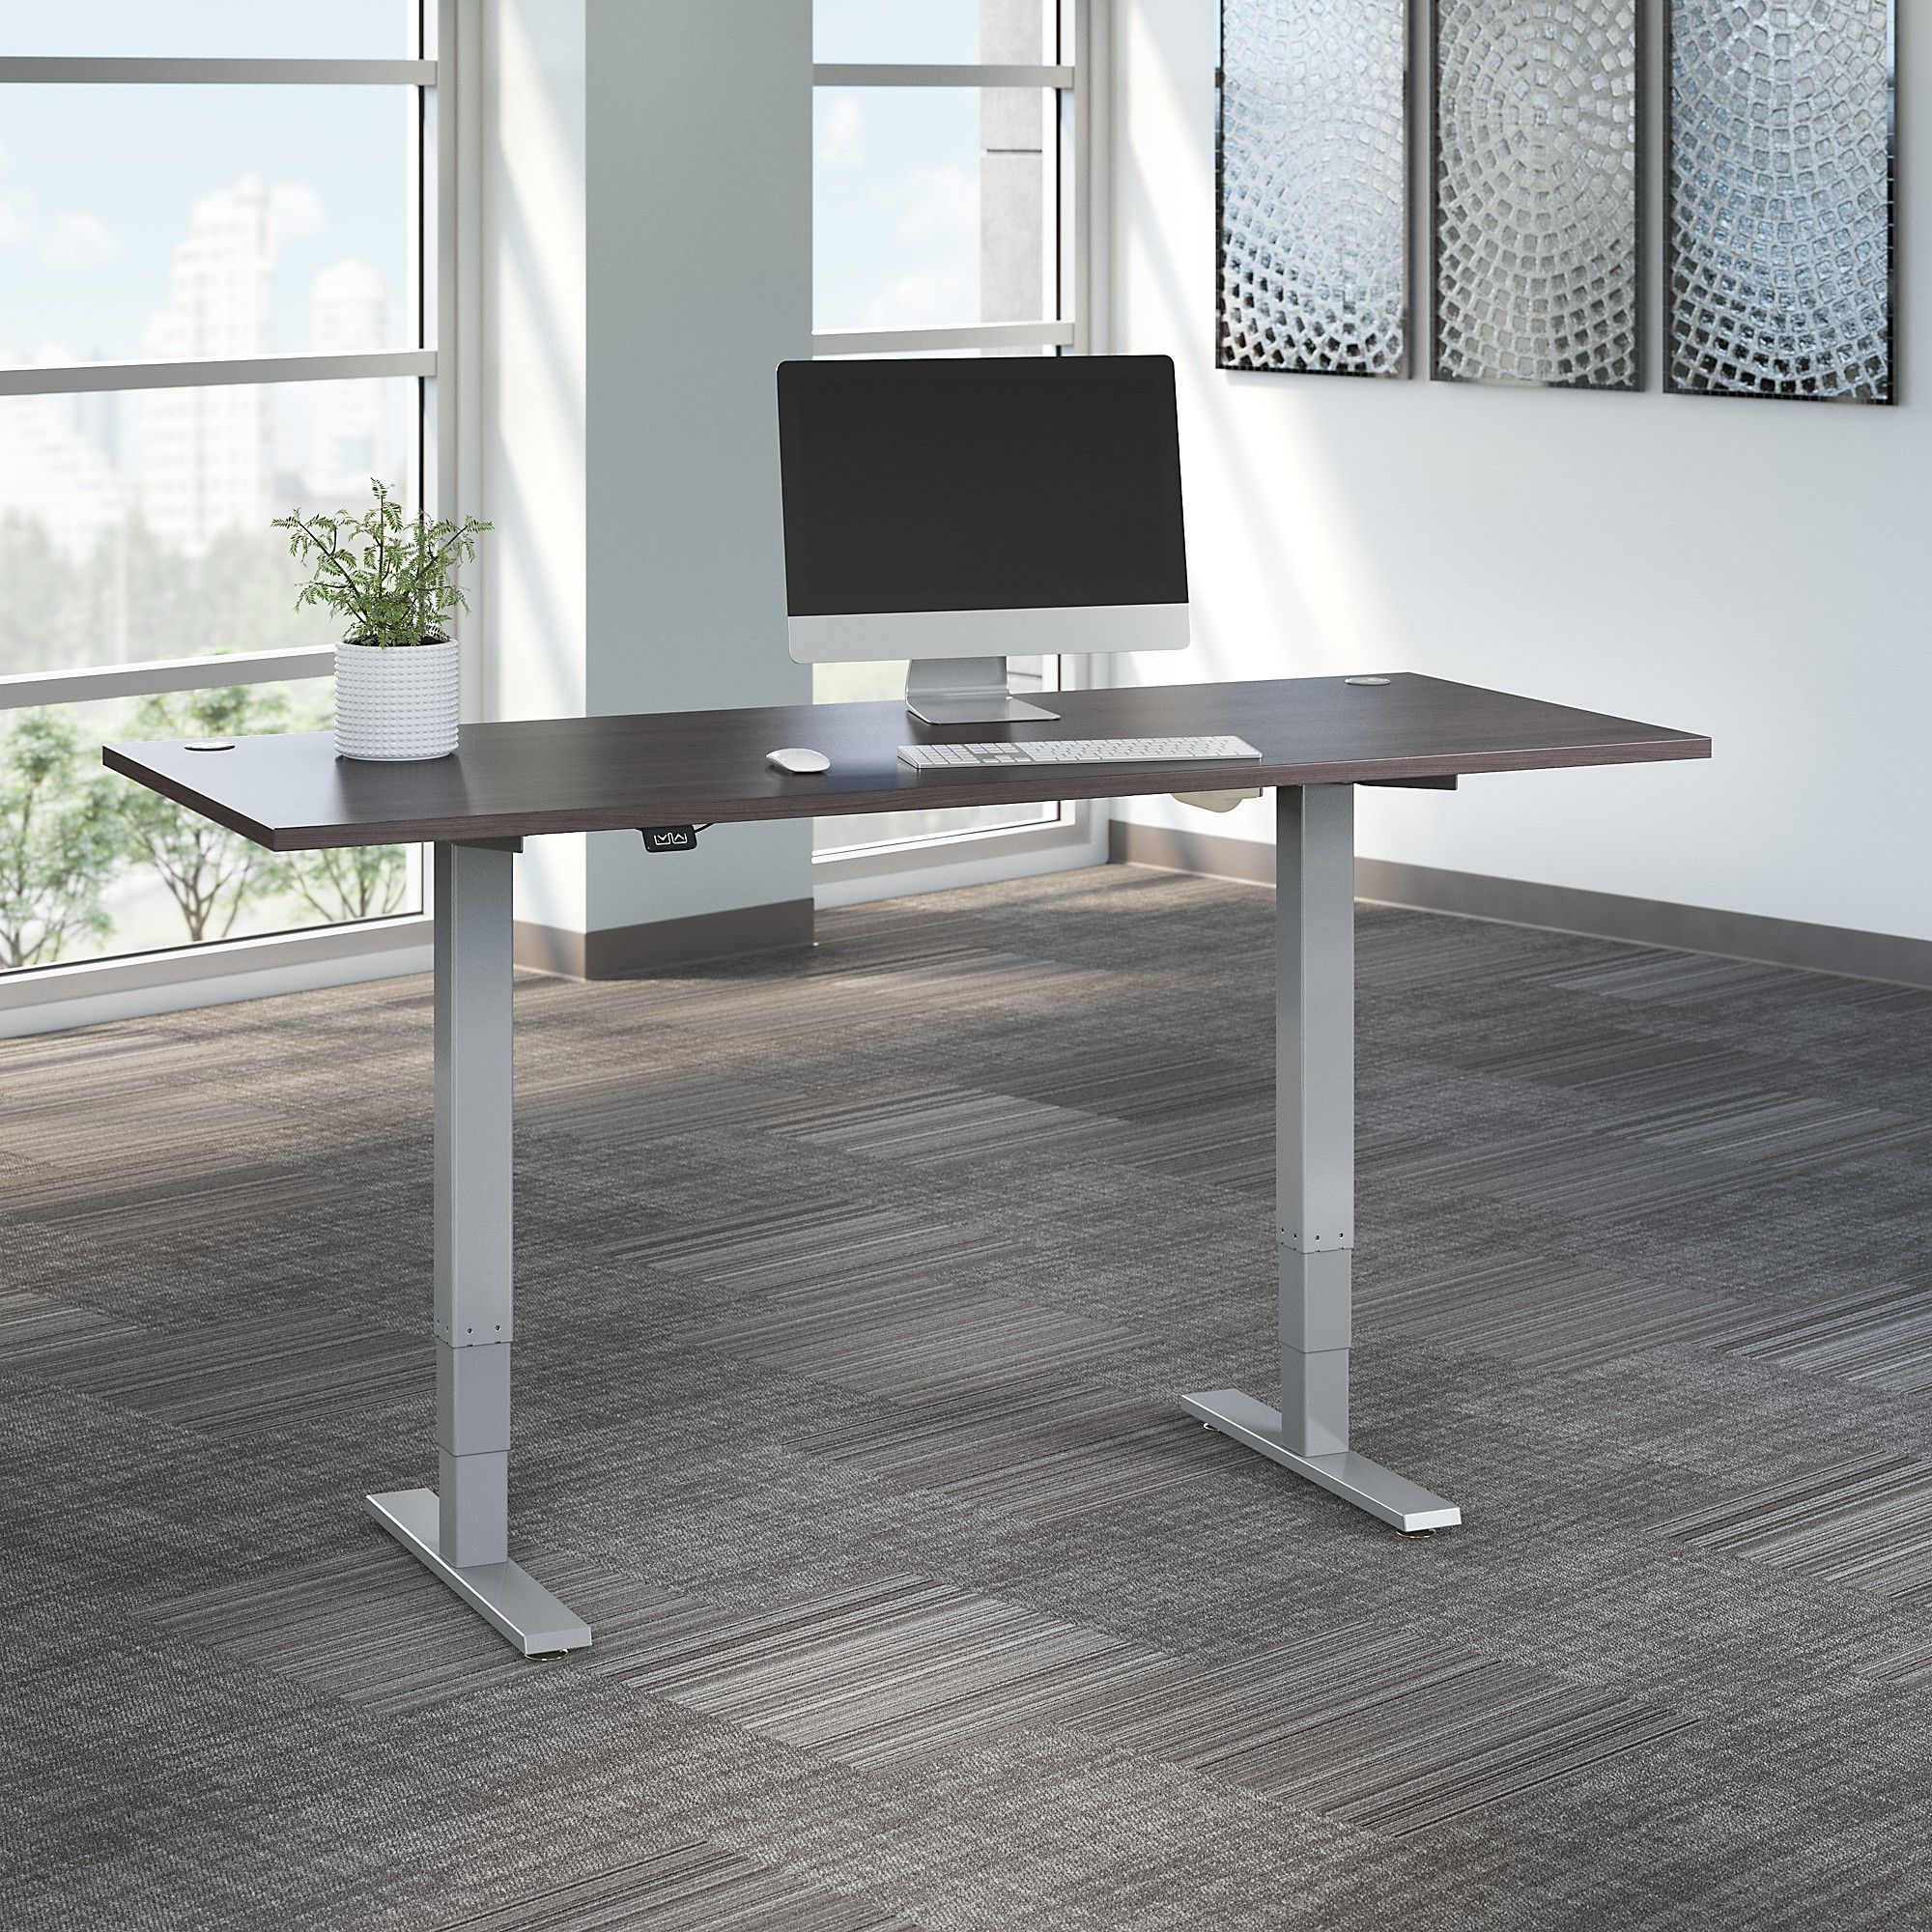 Walnut Adjustable Stand Up Desks Intended For Preferred 72w X 30d Electric Height Adjustable Standing Desk In Storm Gray (View 7 of 15)